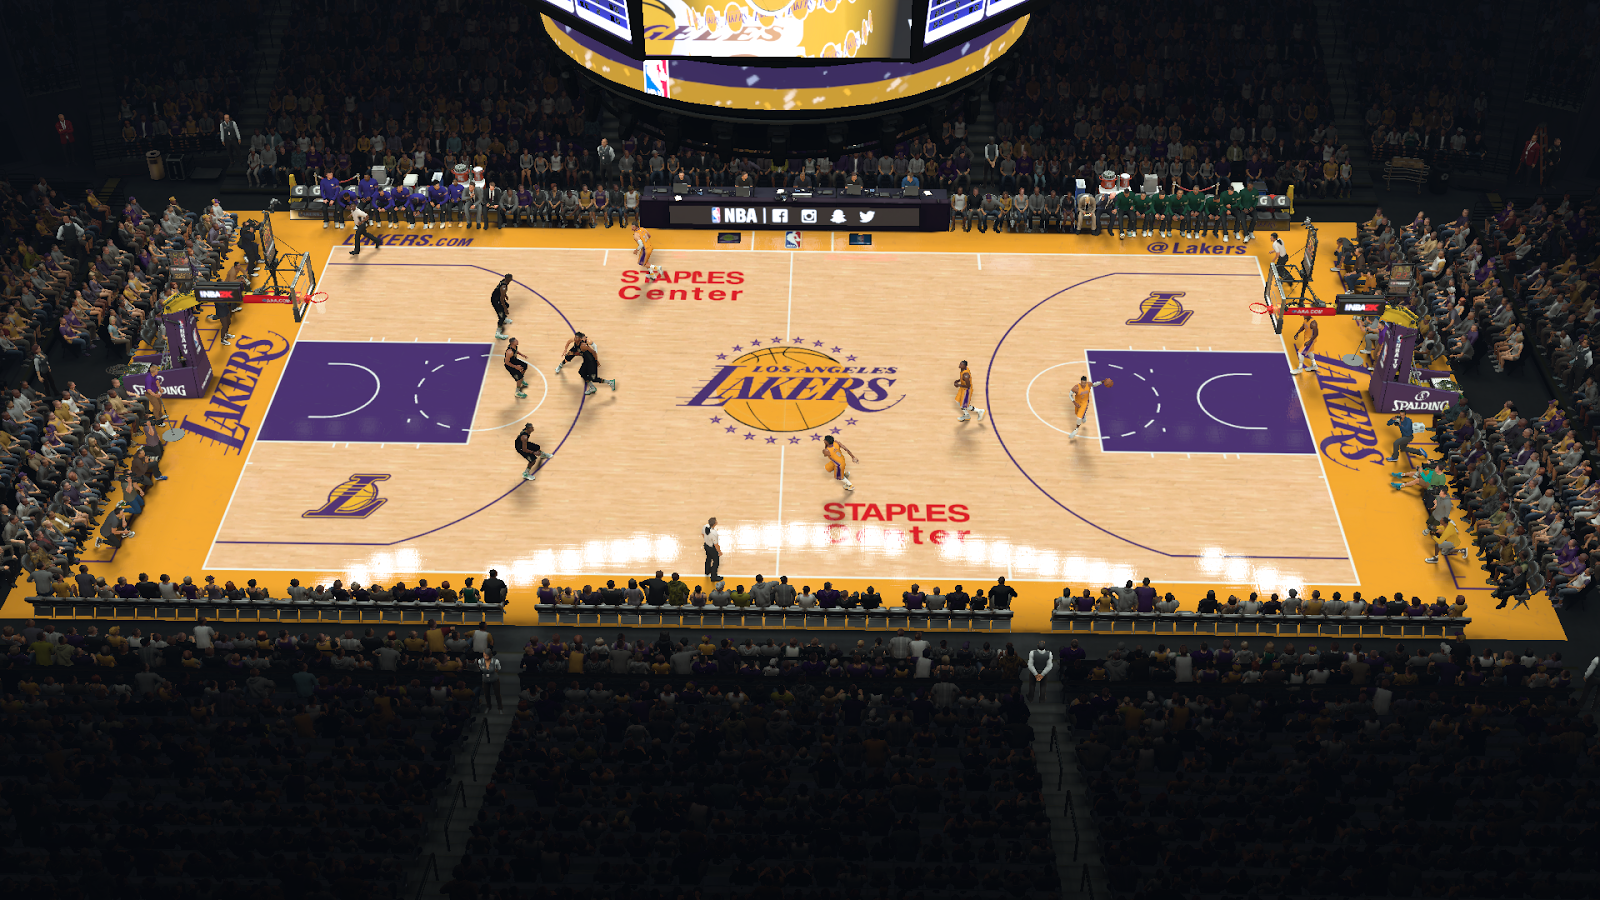 Manni Live│2K Patches: Los Angeles Lakers Staples Center HD